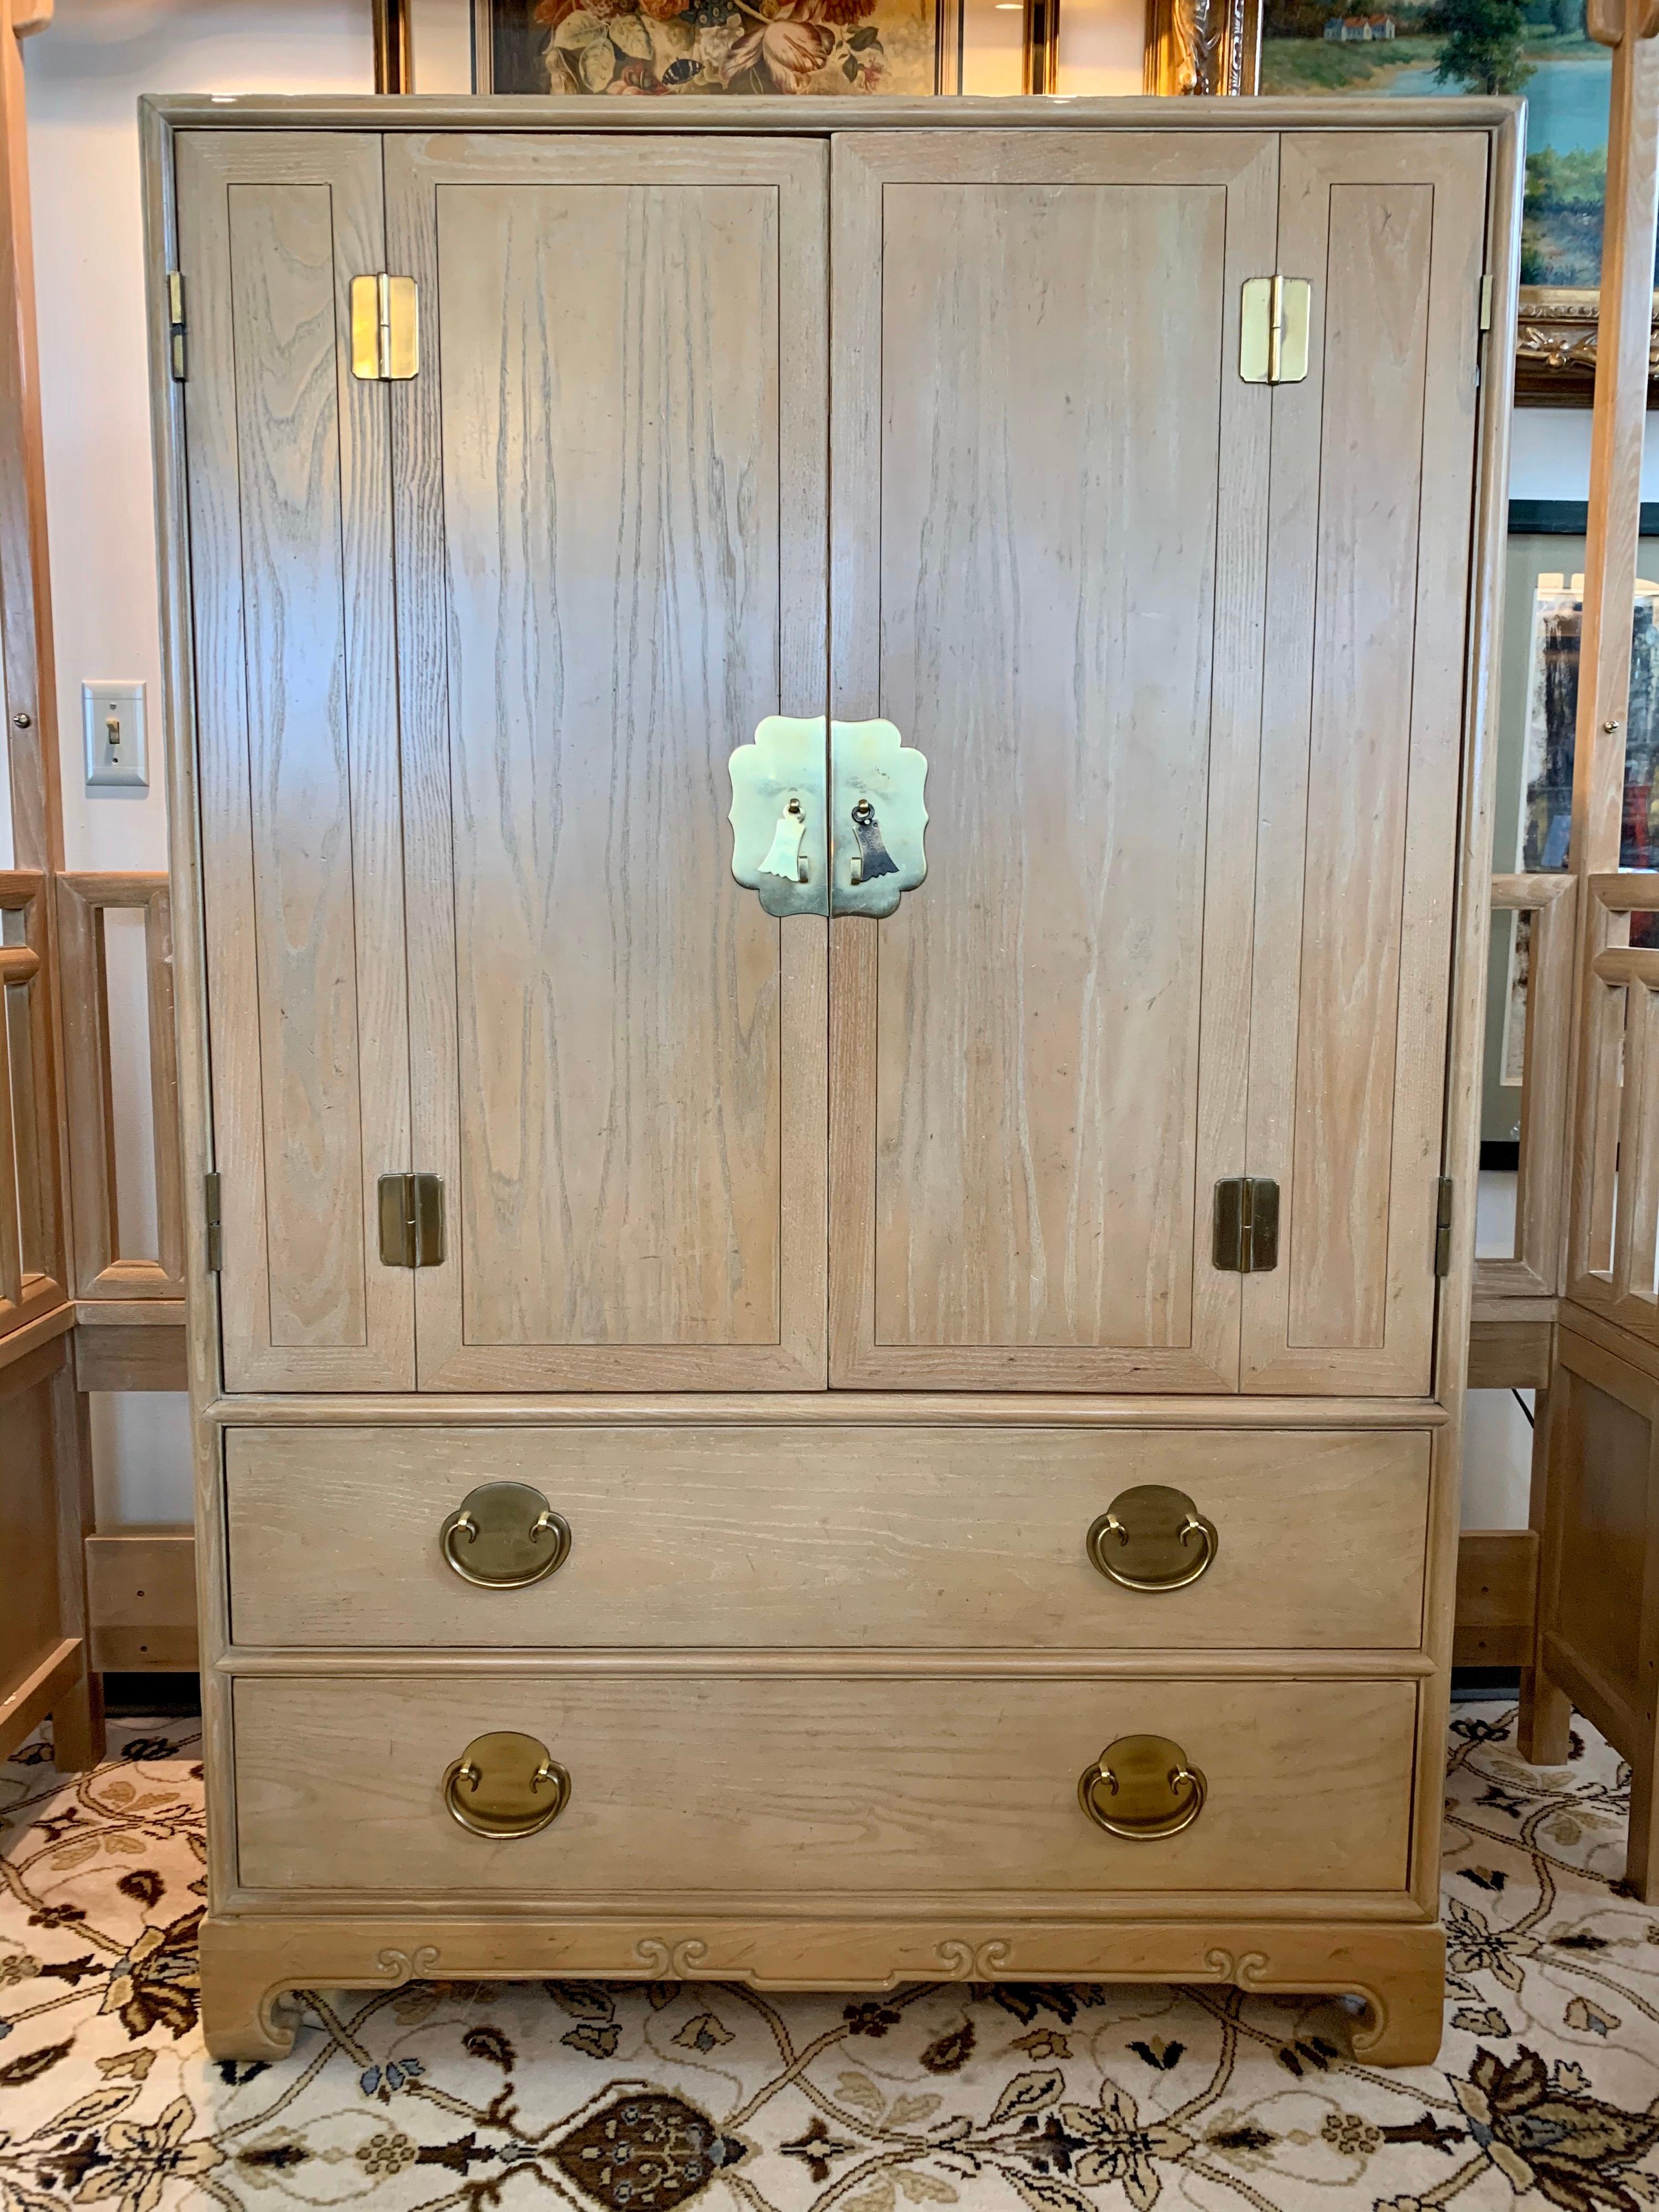 An elegant mens wardrobe dresser cabinet by Ray Sabota for Century Furniture Company in cerused oak, circa 1970s. Brass hardware and lovely motifs accent the piece. Functional scale will allow for use in many different rooms; think bedroom, living